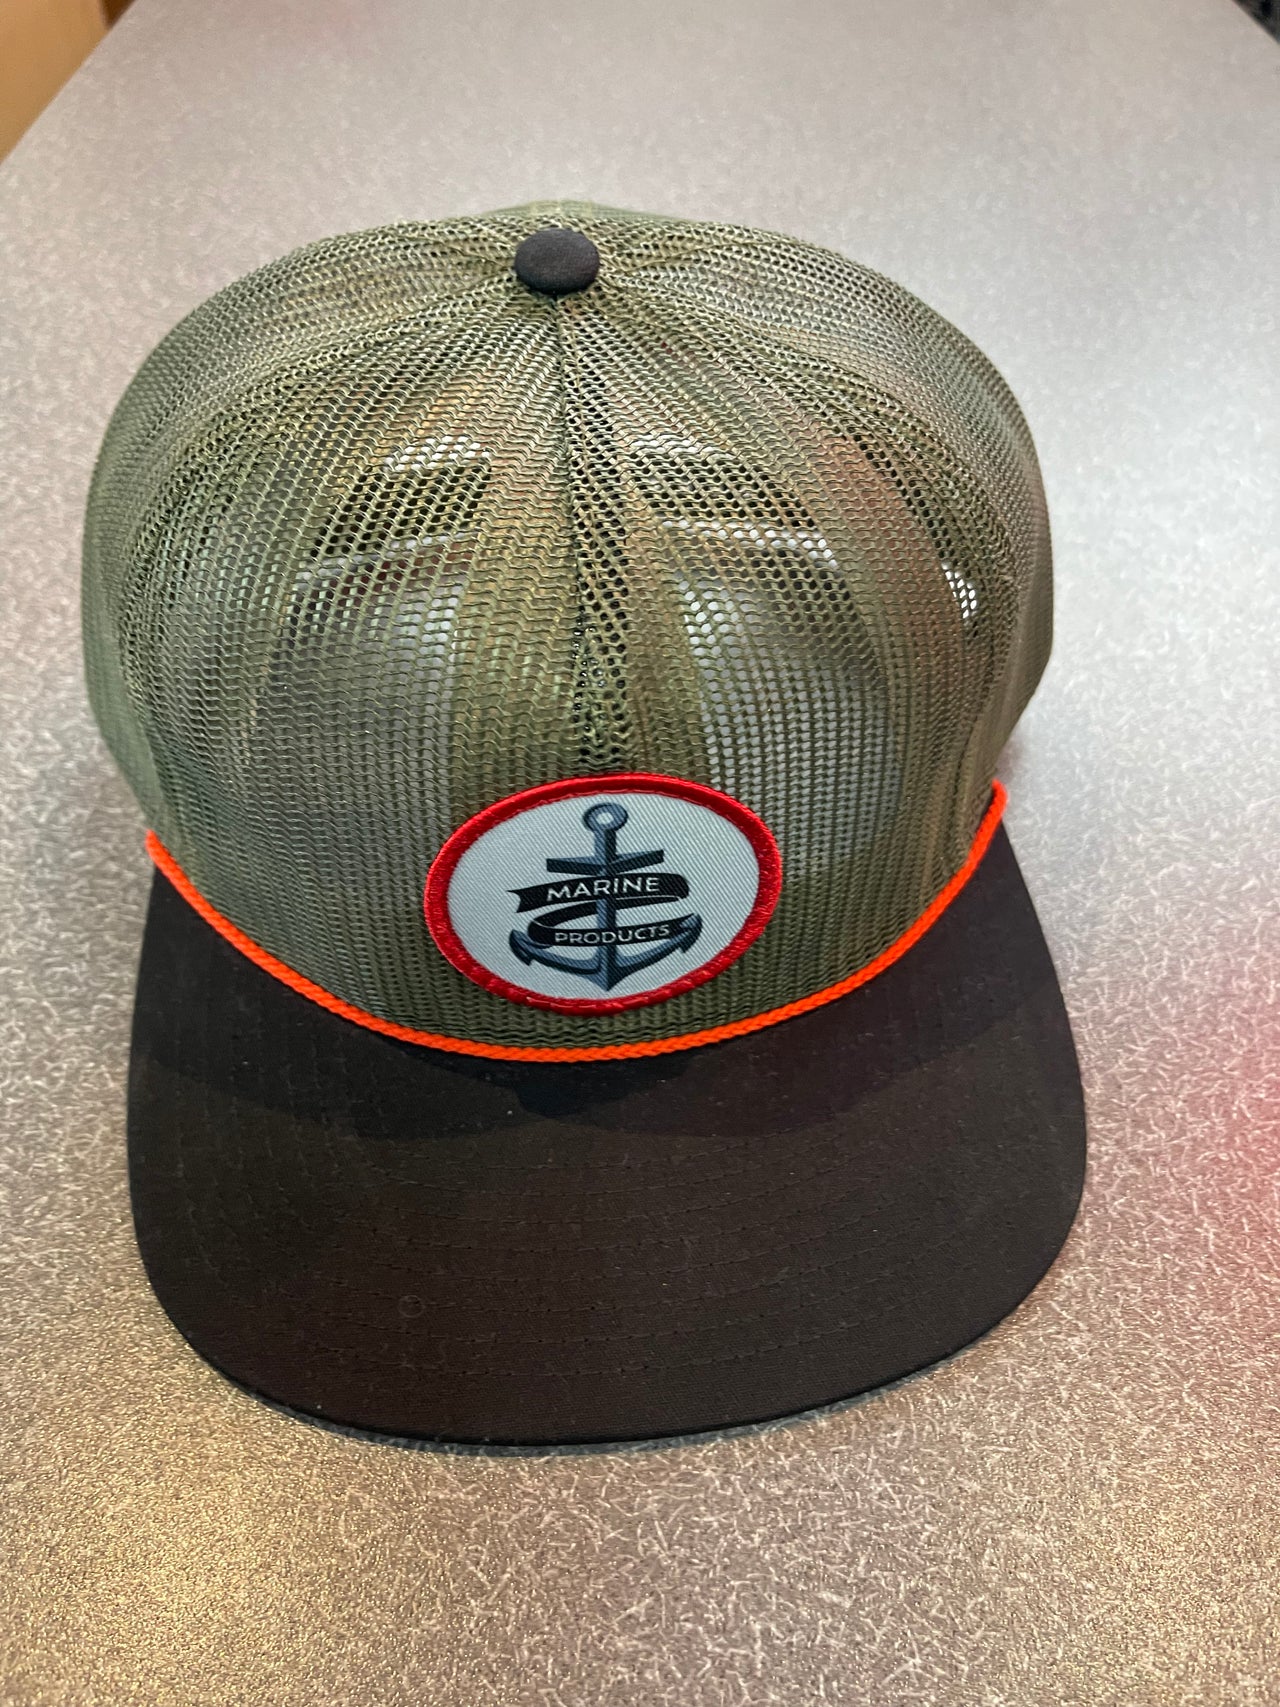 Marine Products Loden/Black Mesh Hat w/ Anchor Patch